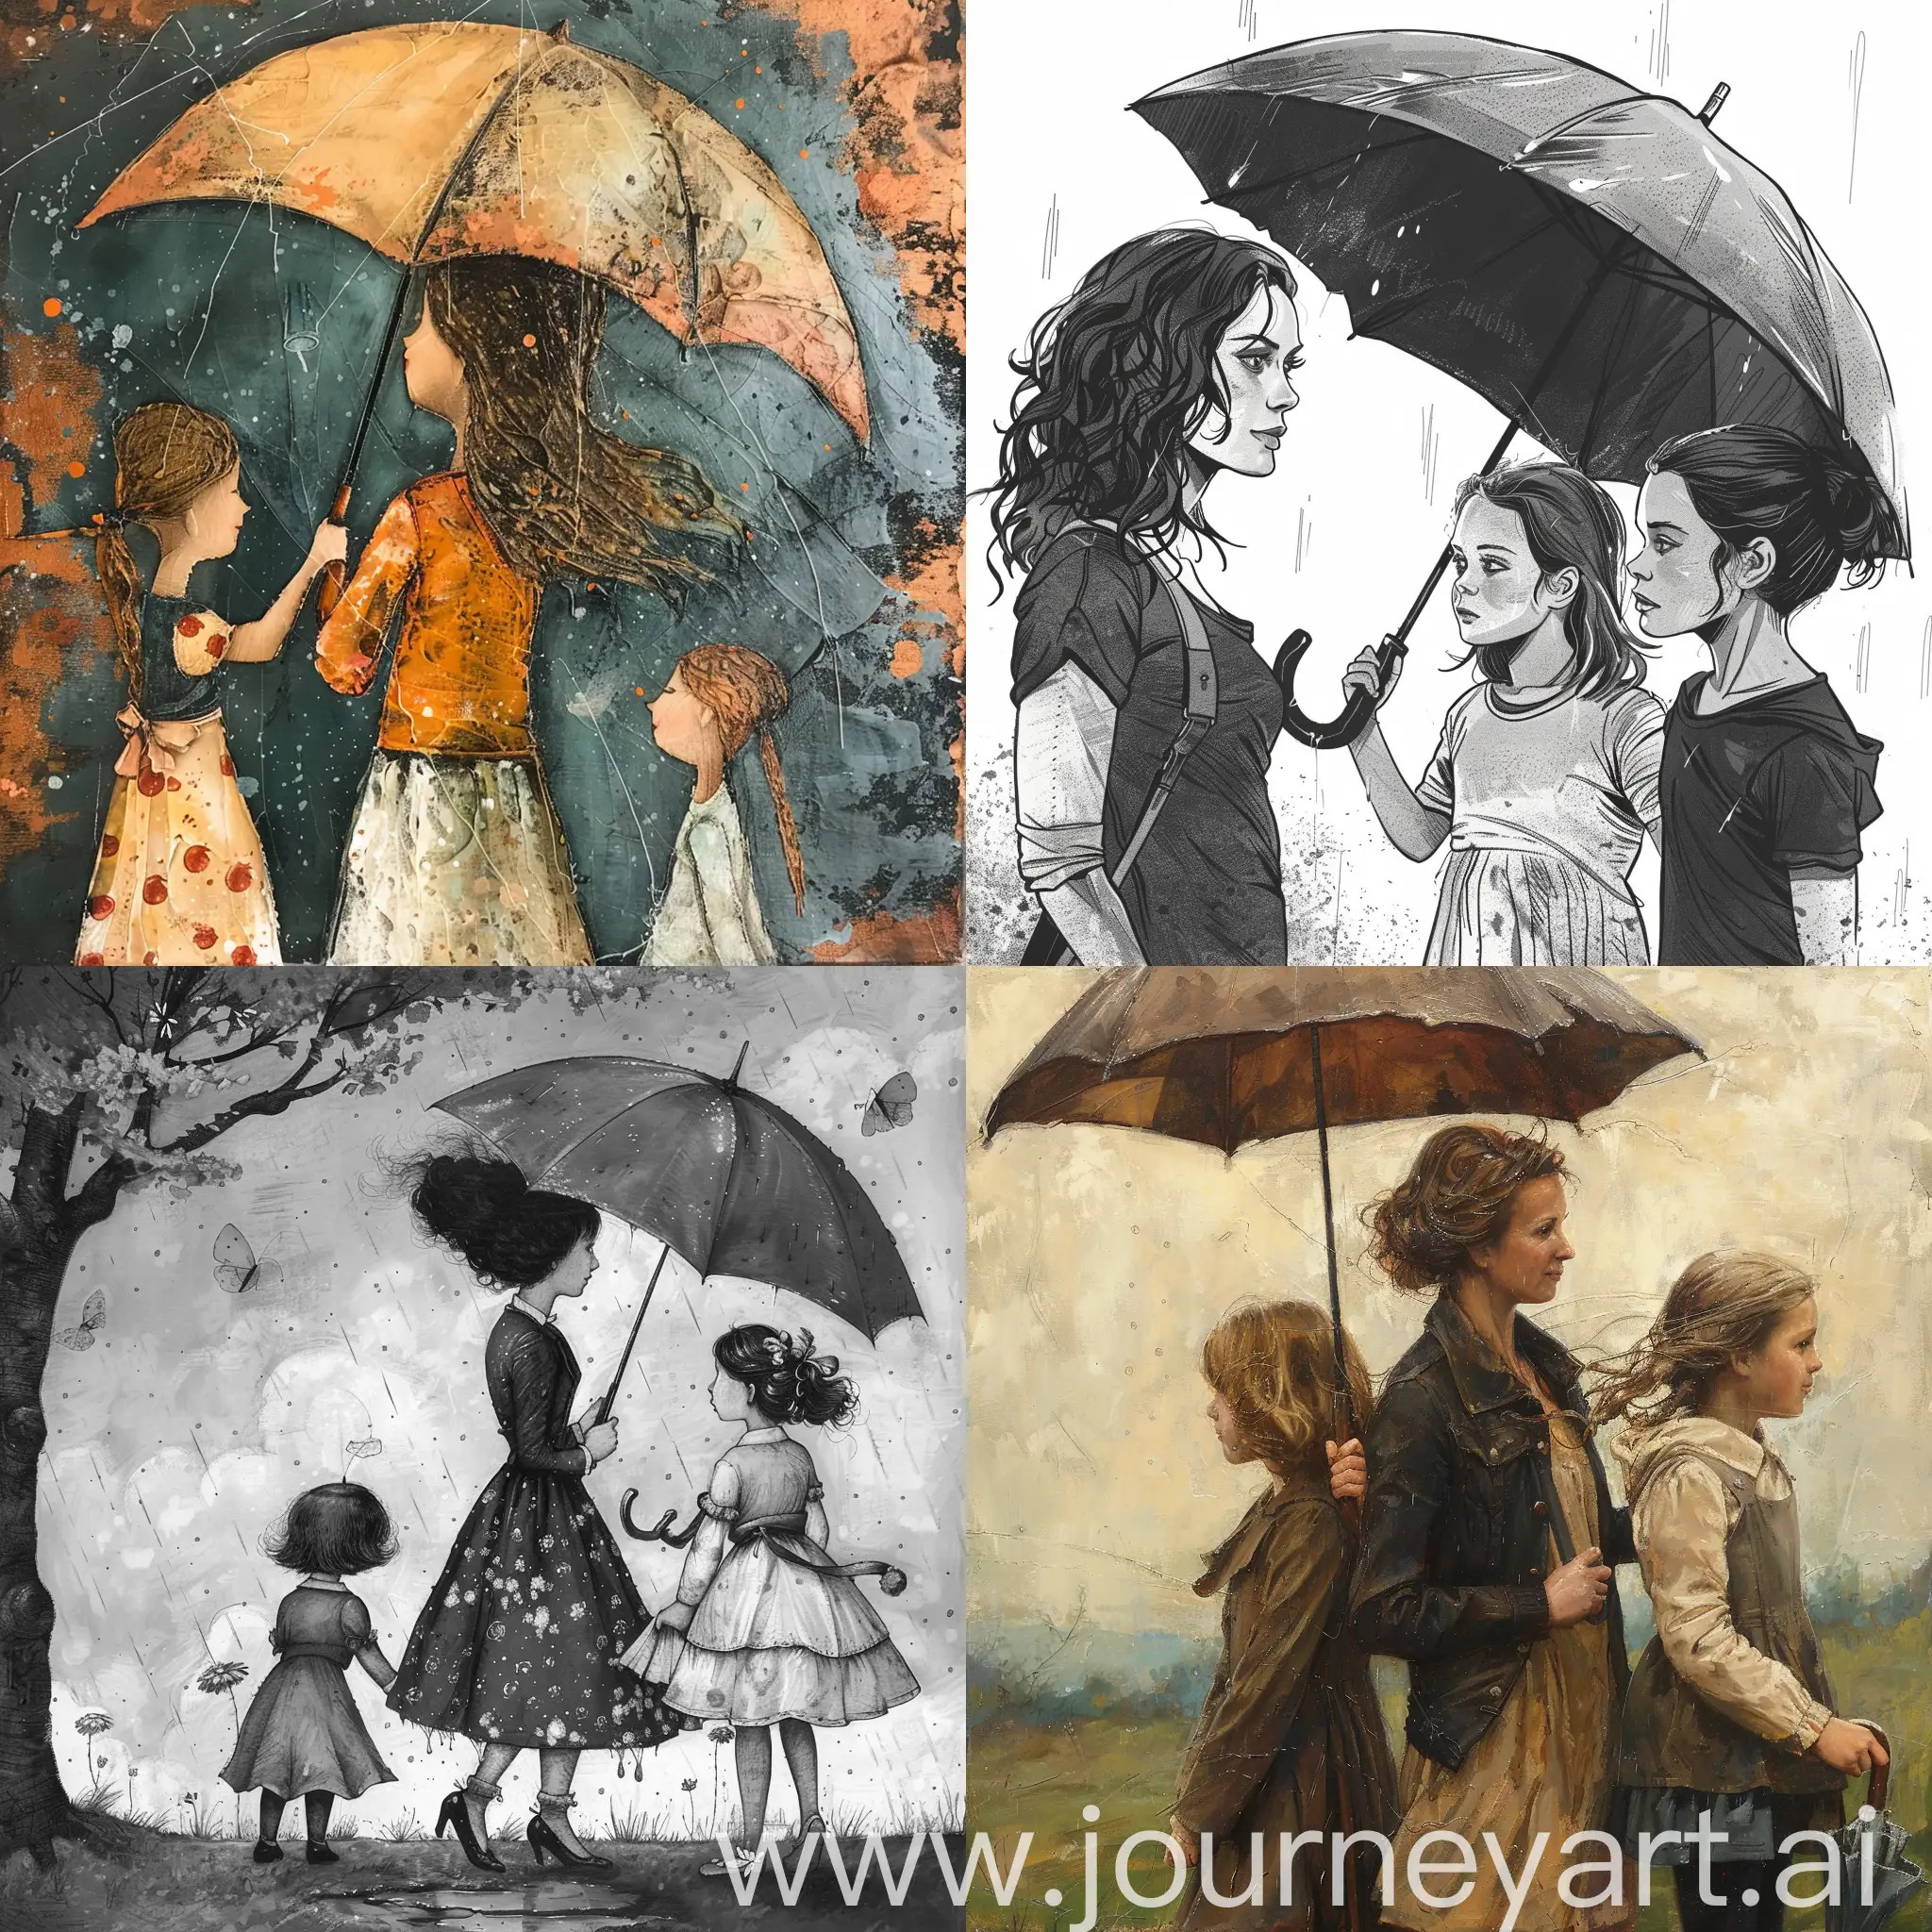 The mother held an umbrella and turned to the side of her two female children. In the middle of a little rain Mom's hair was a little wet.